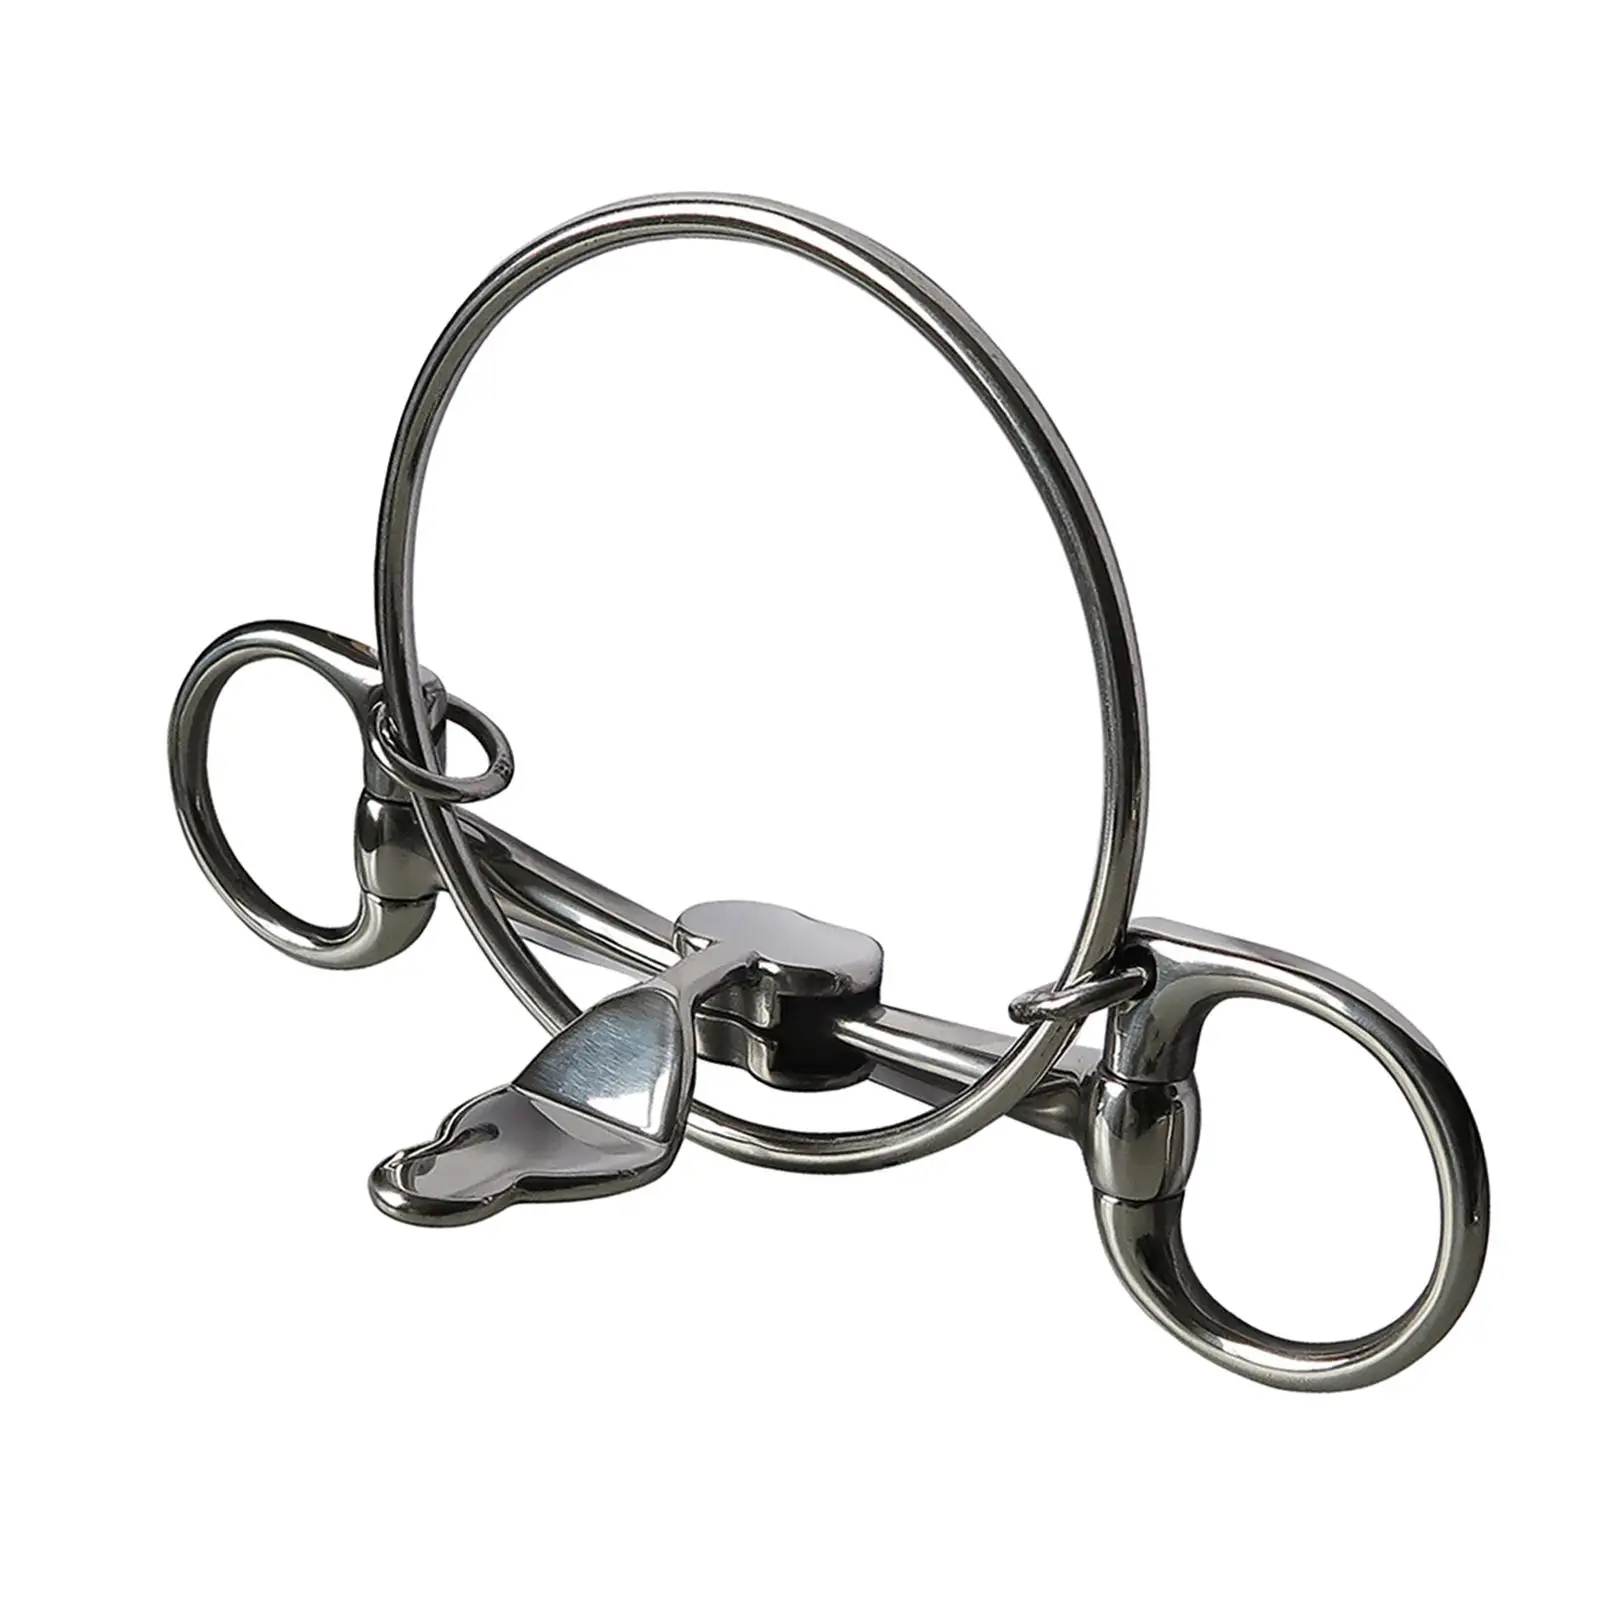 Horse Bits Rings Metal Horses Bit Equestrian Supplies Harness Western Style All Purpose Training Equipment Rings Snaffle Bits